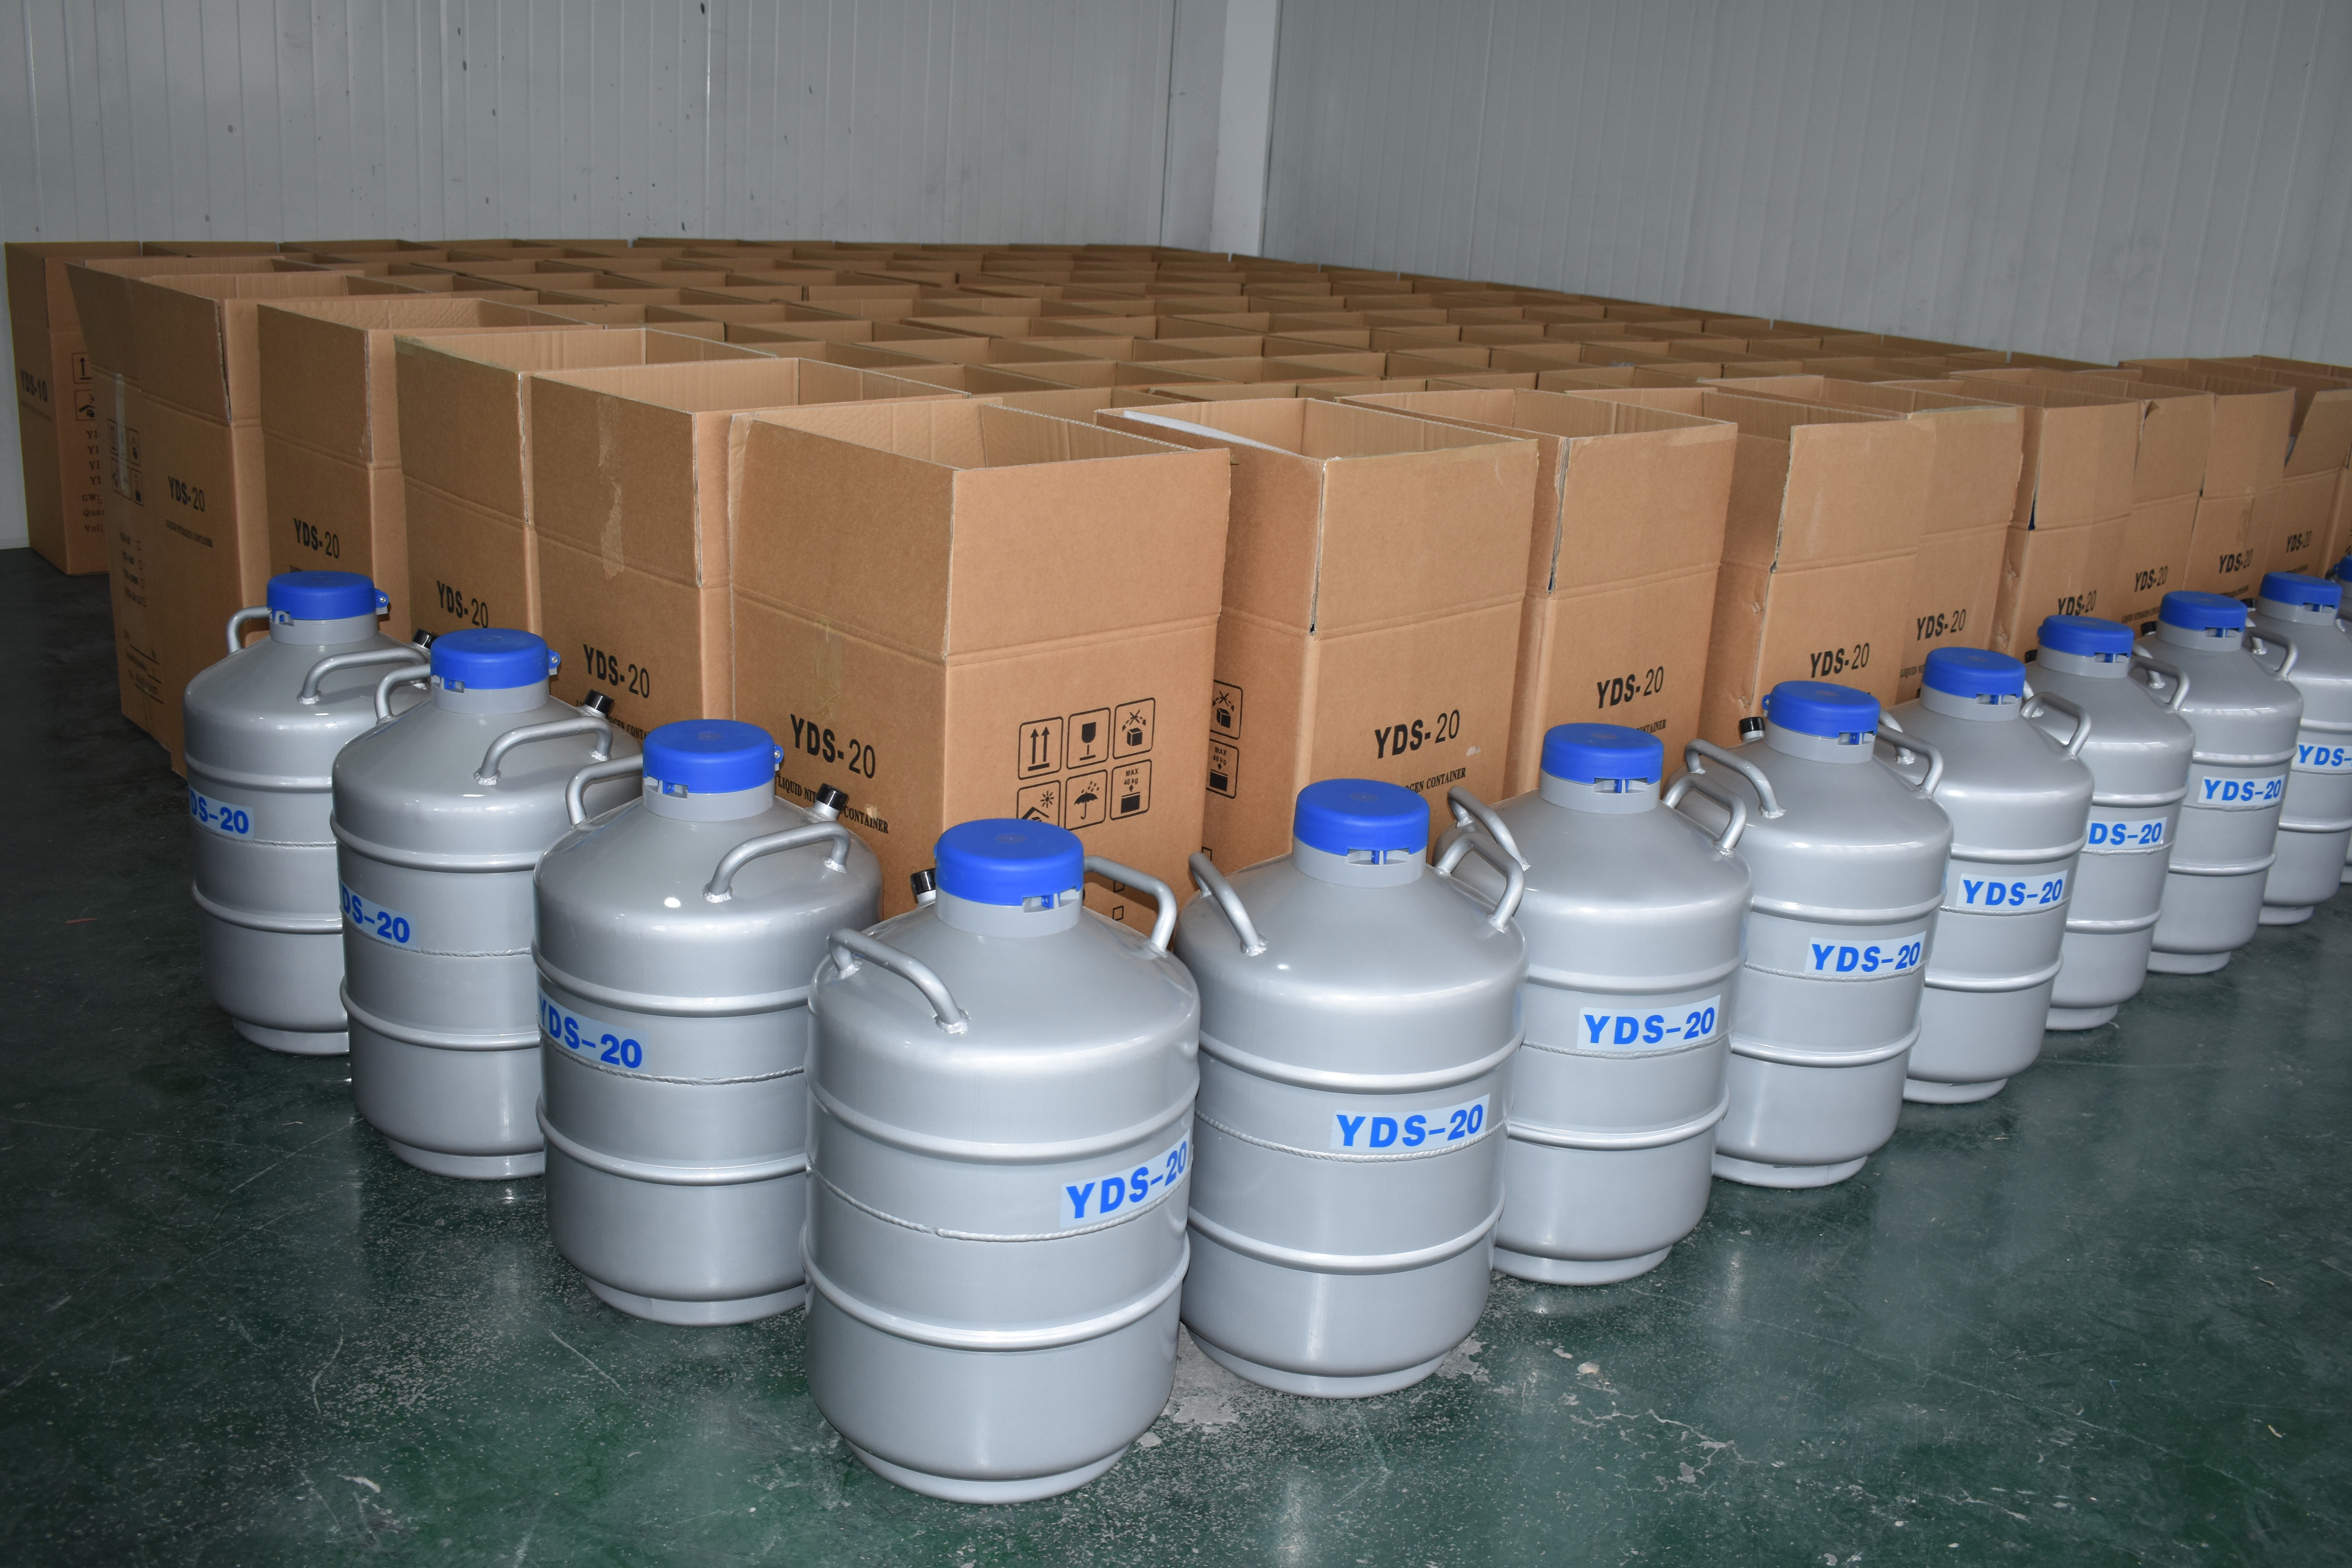 YDS-20 liquid nitrogen tank with canisters for cryogenic storage biological materials